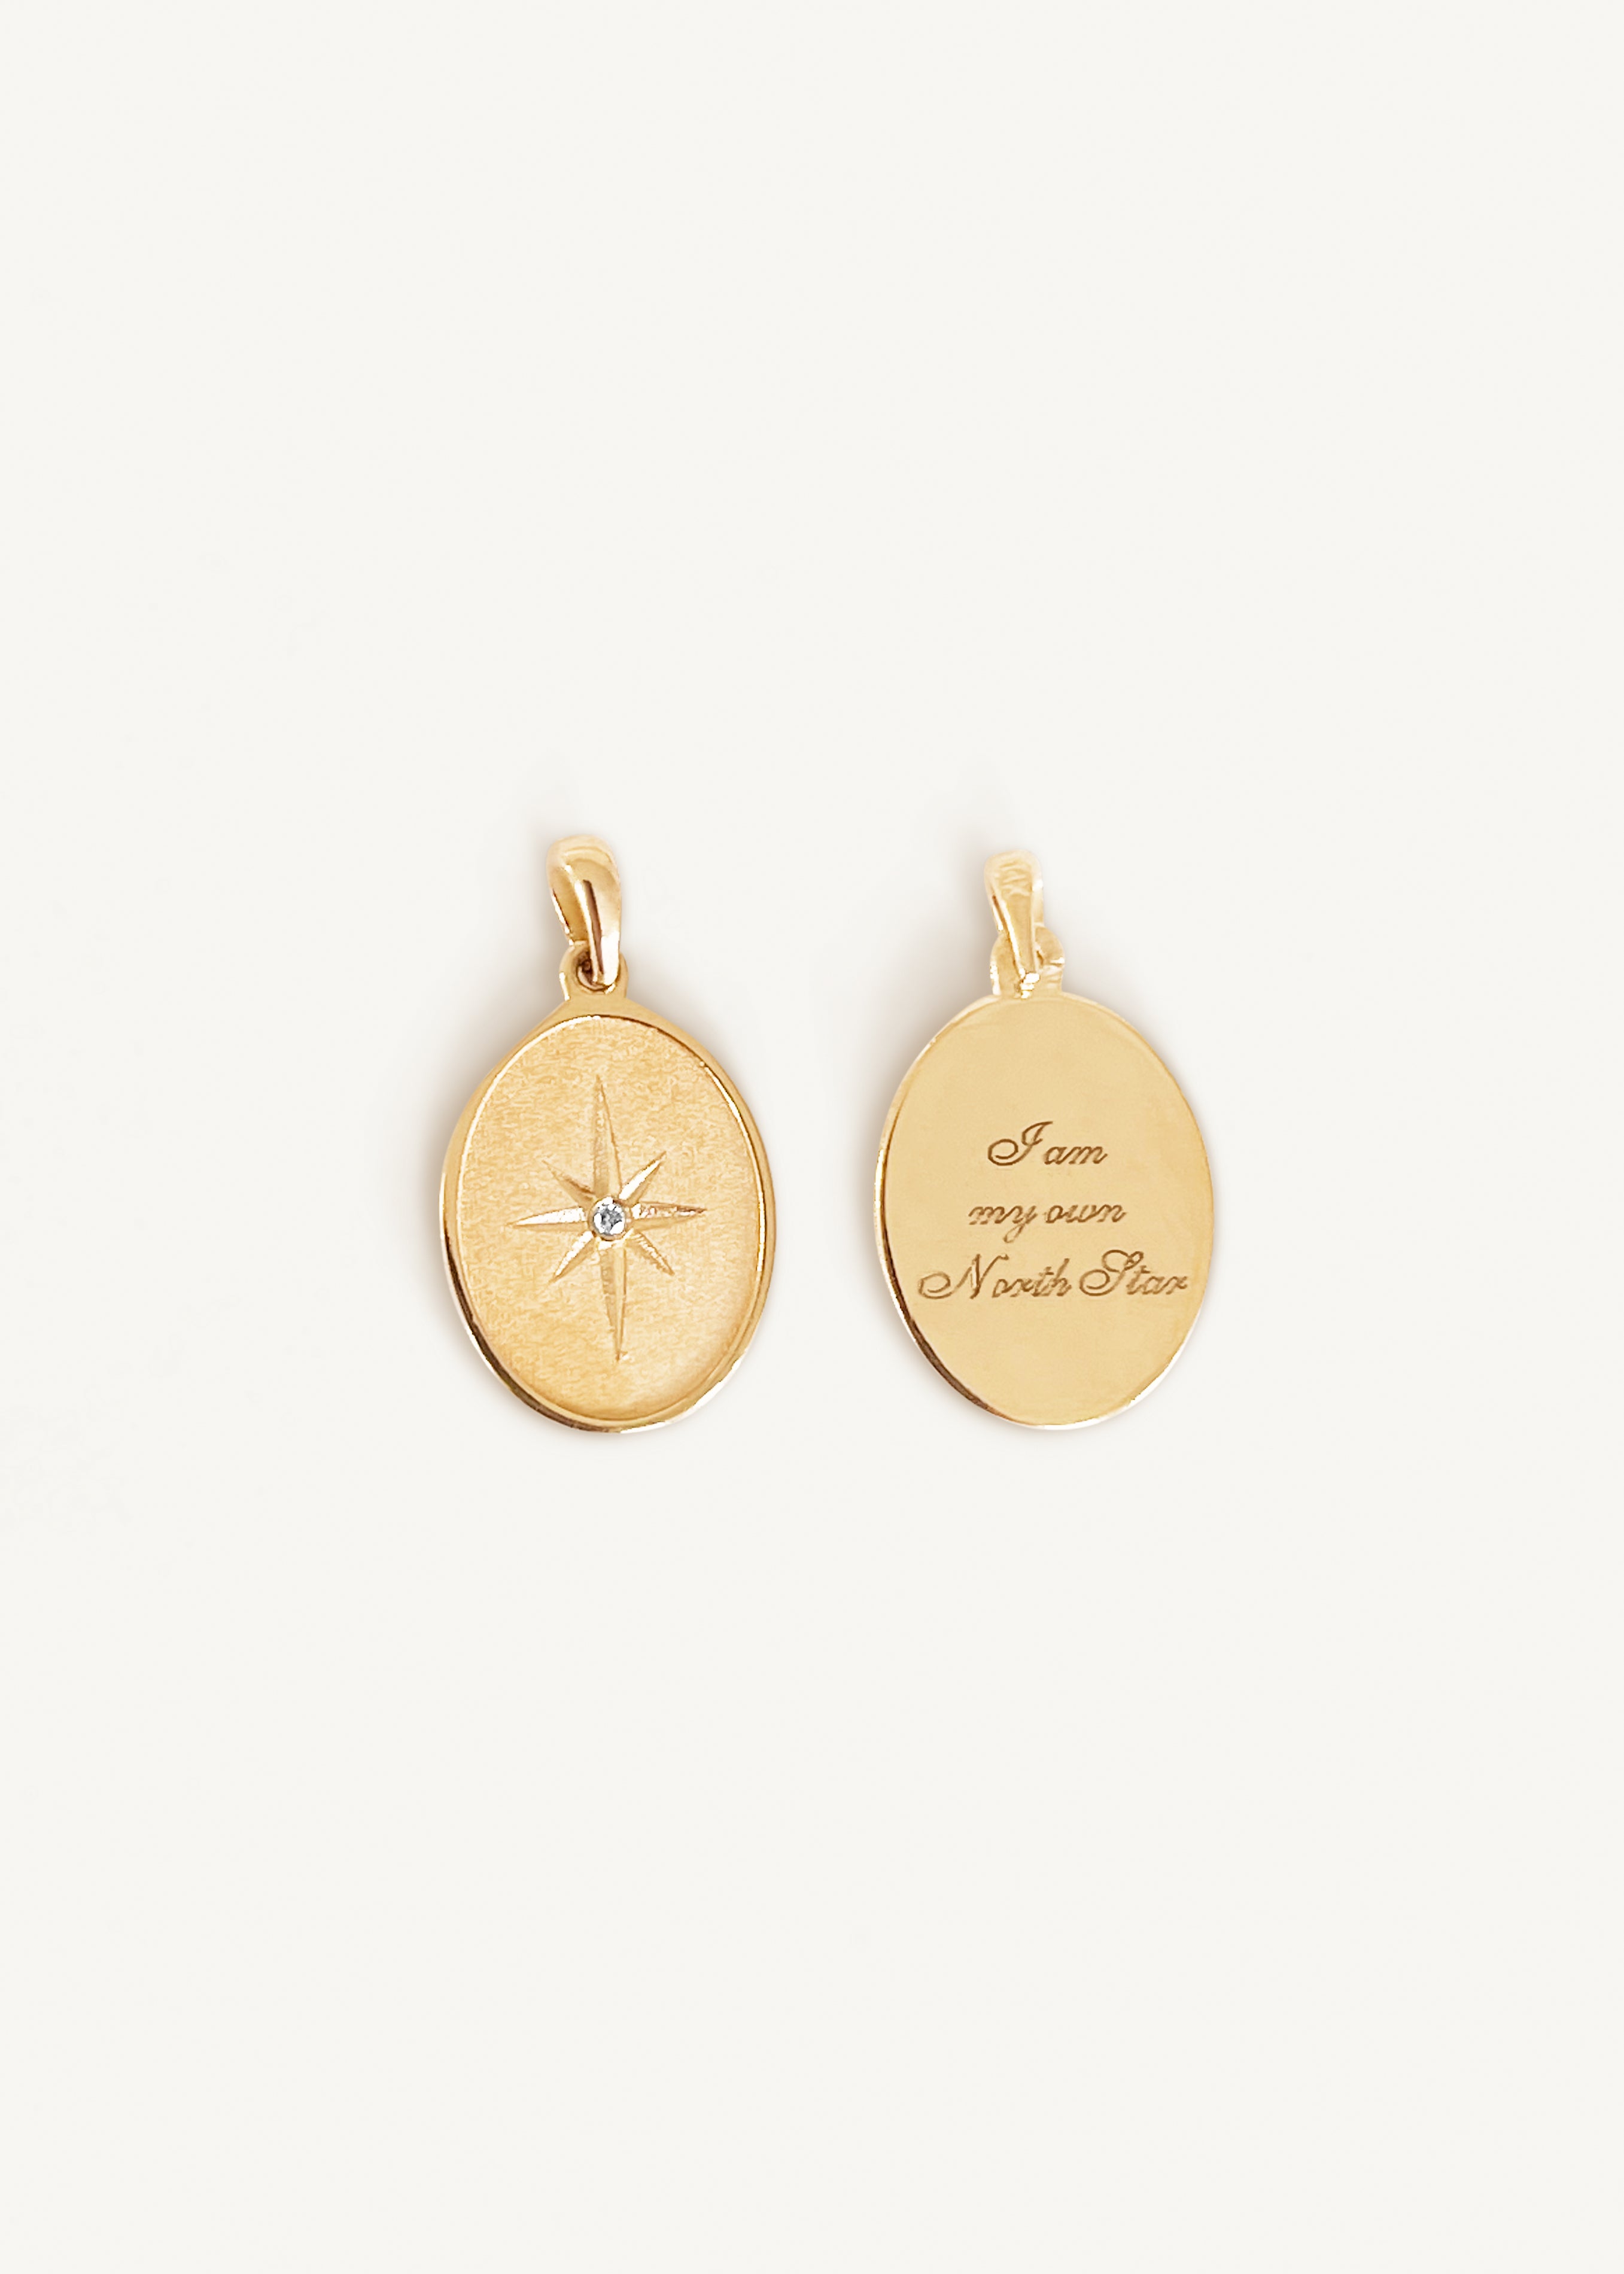 alt="back and front of Mother.ly x Kinn North Star Pendant"